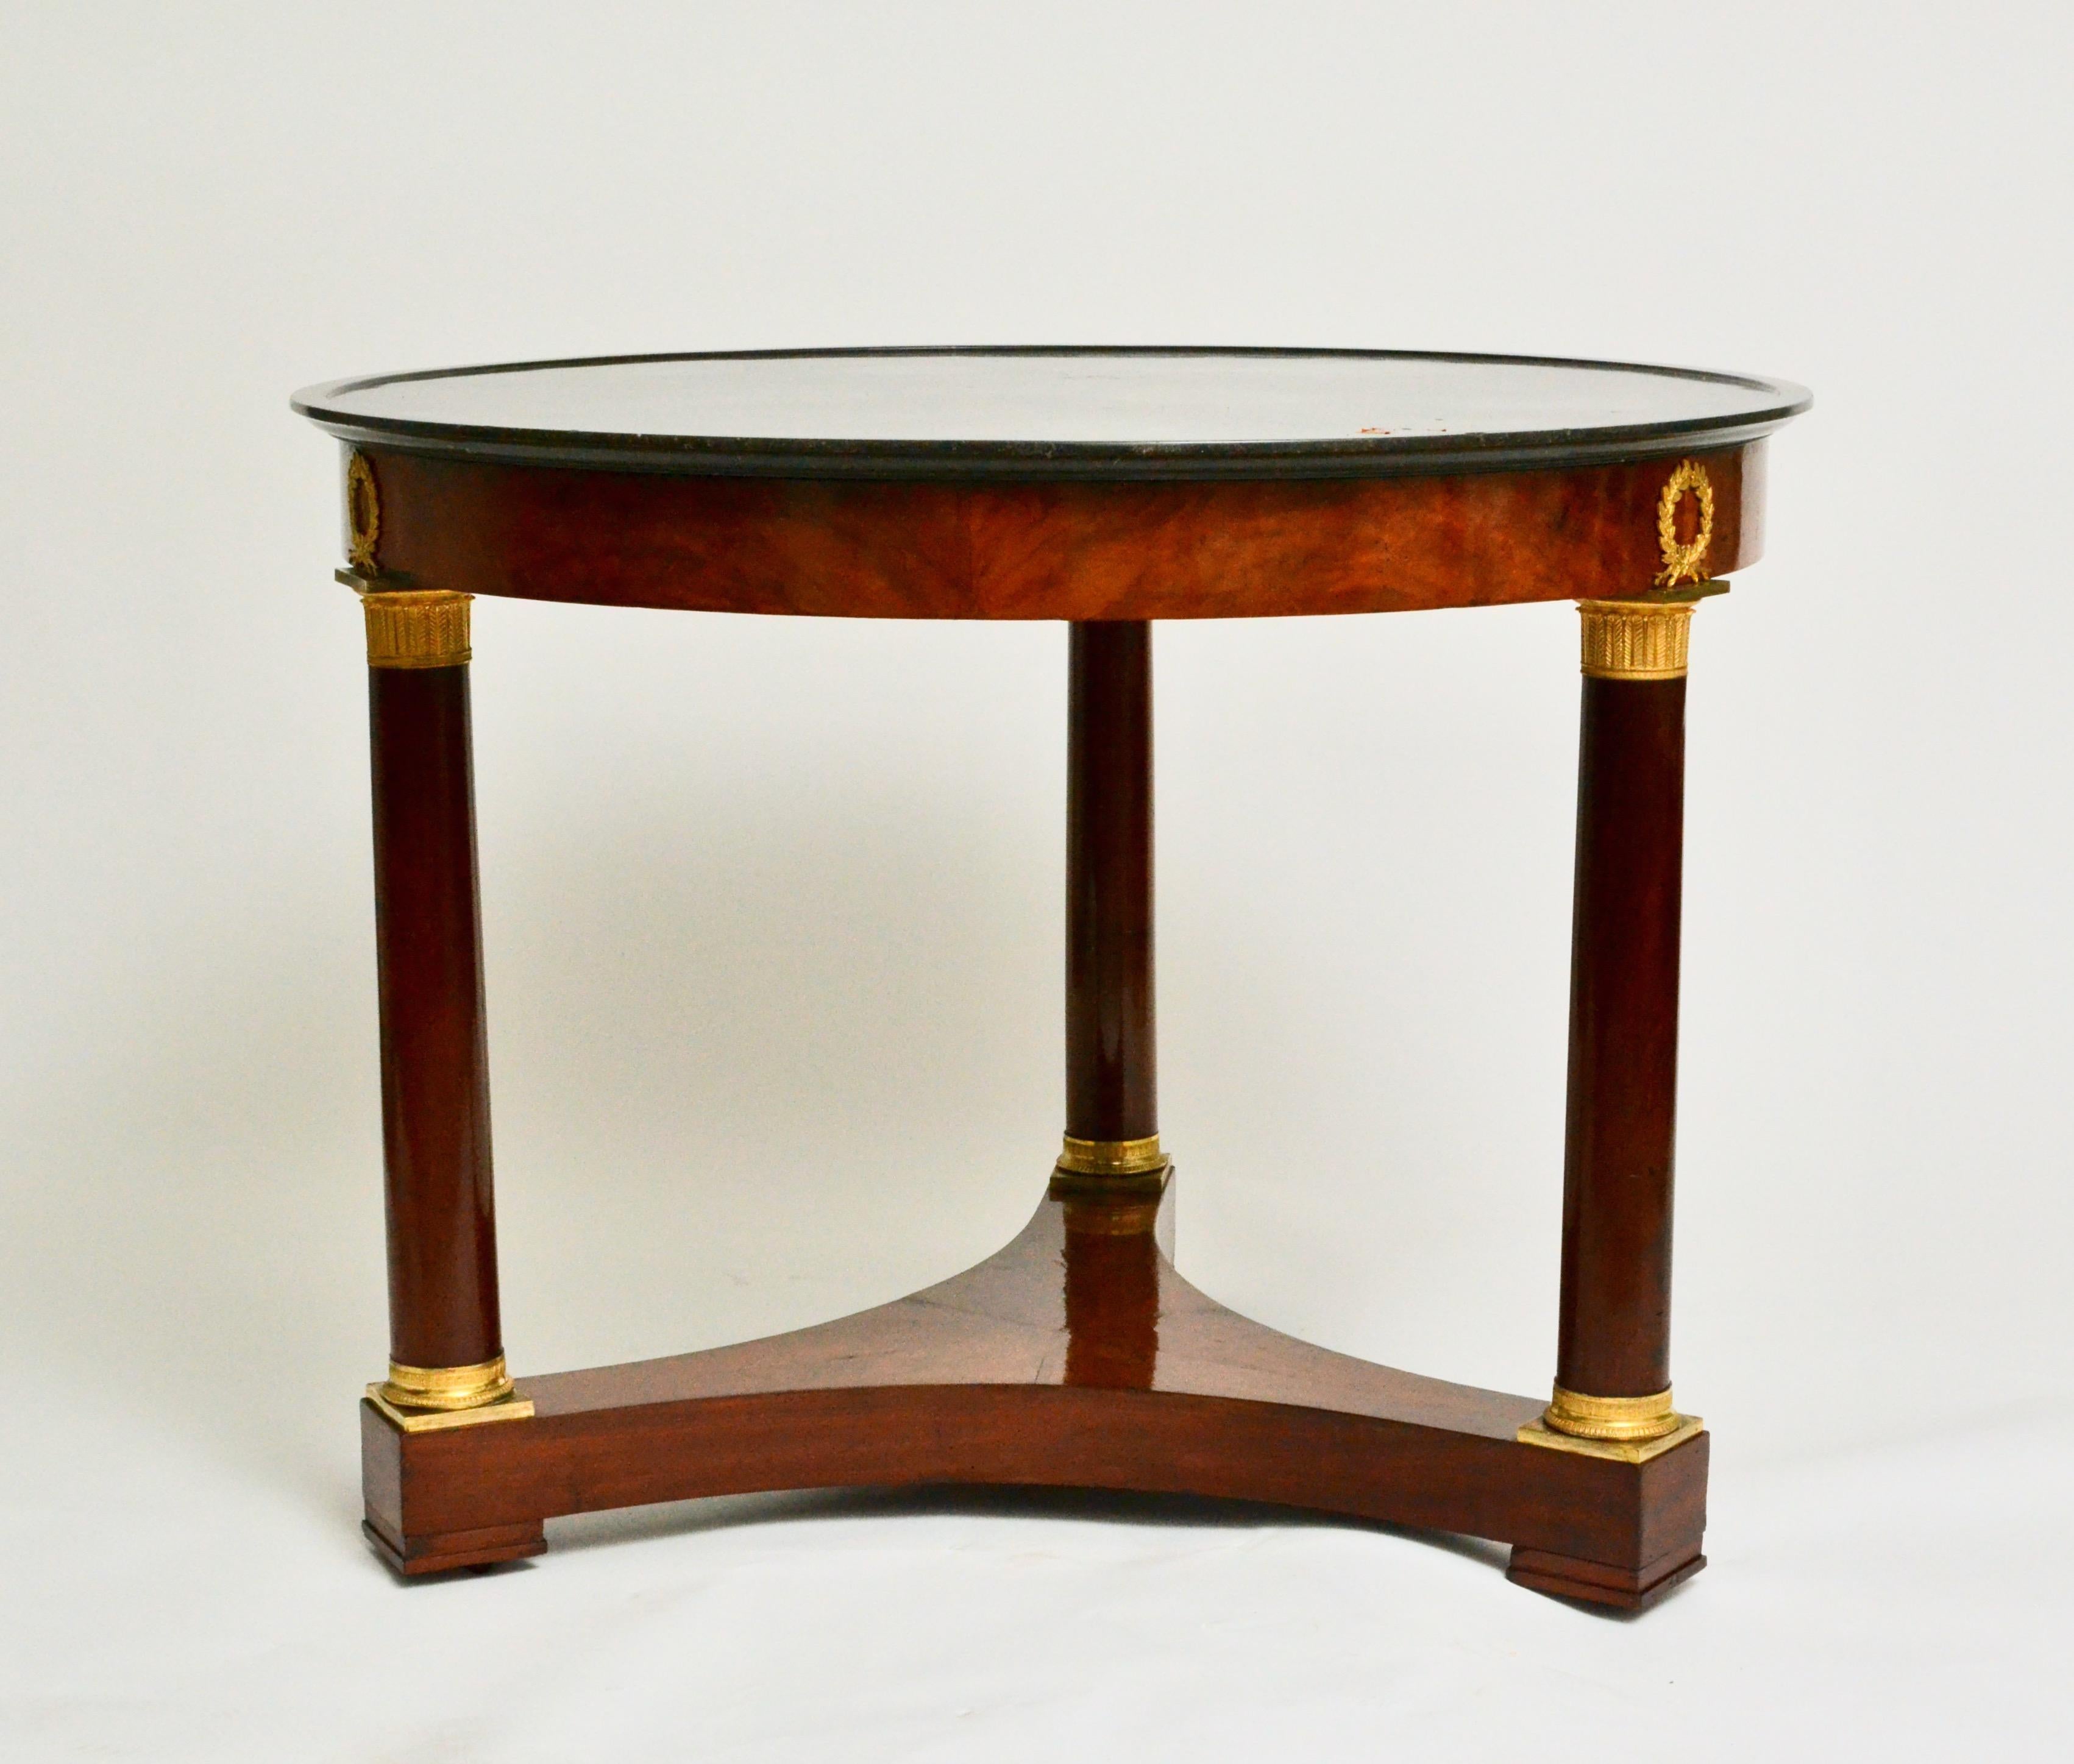 19th Century Empire Gueridon or Center Table With Black Marble Top With Gilt Bronze Mounts.